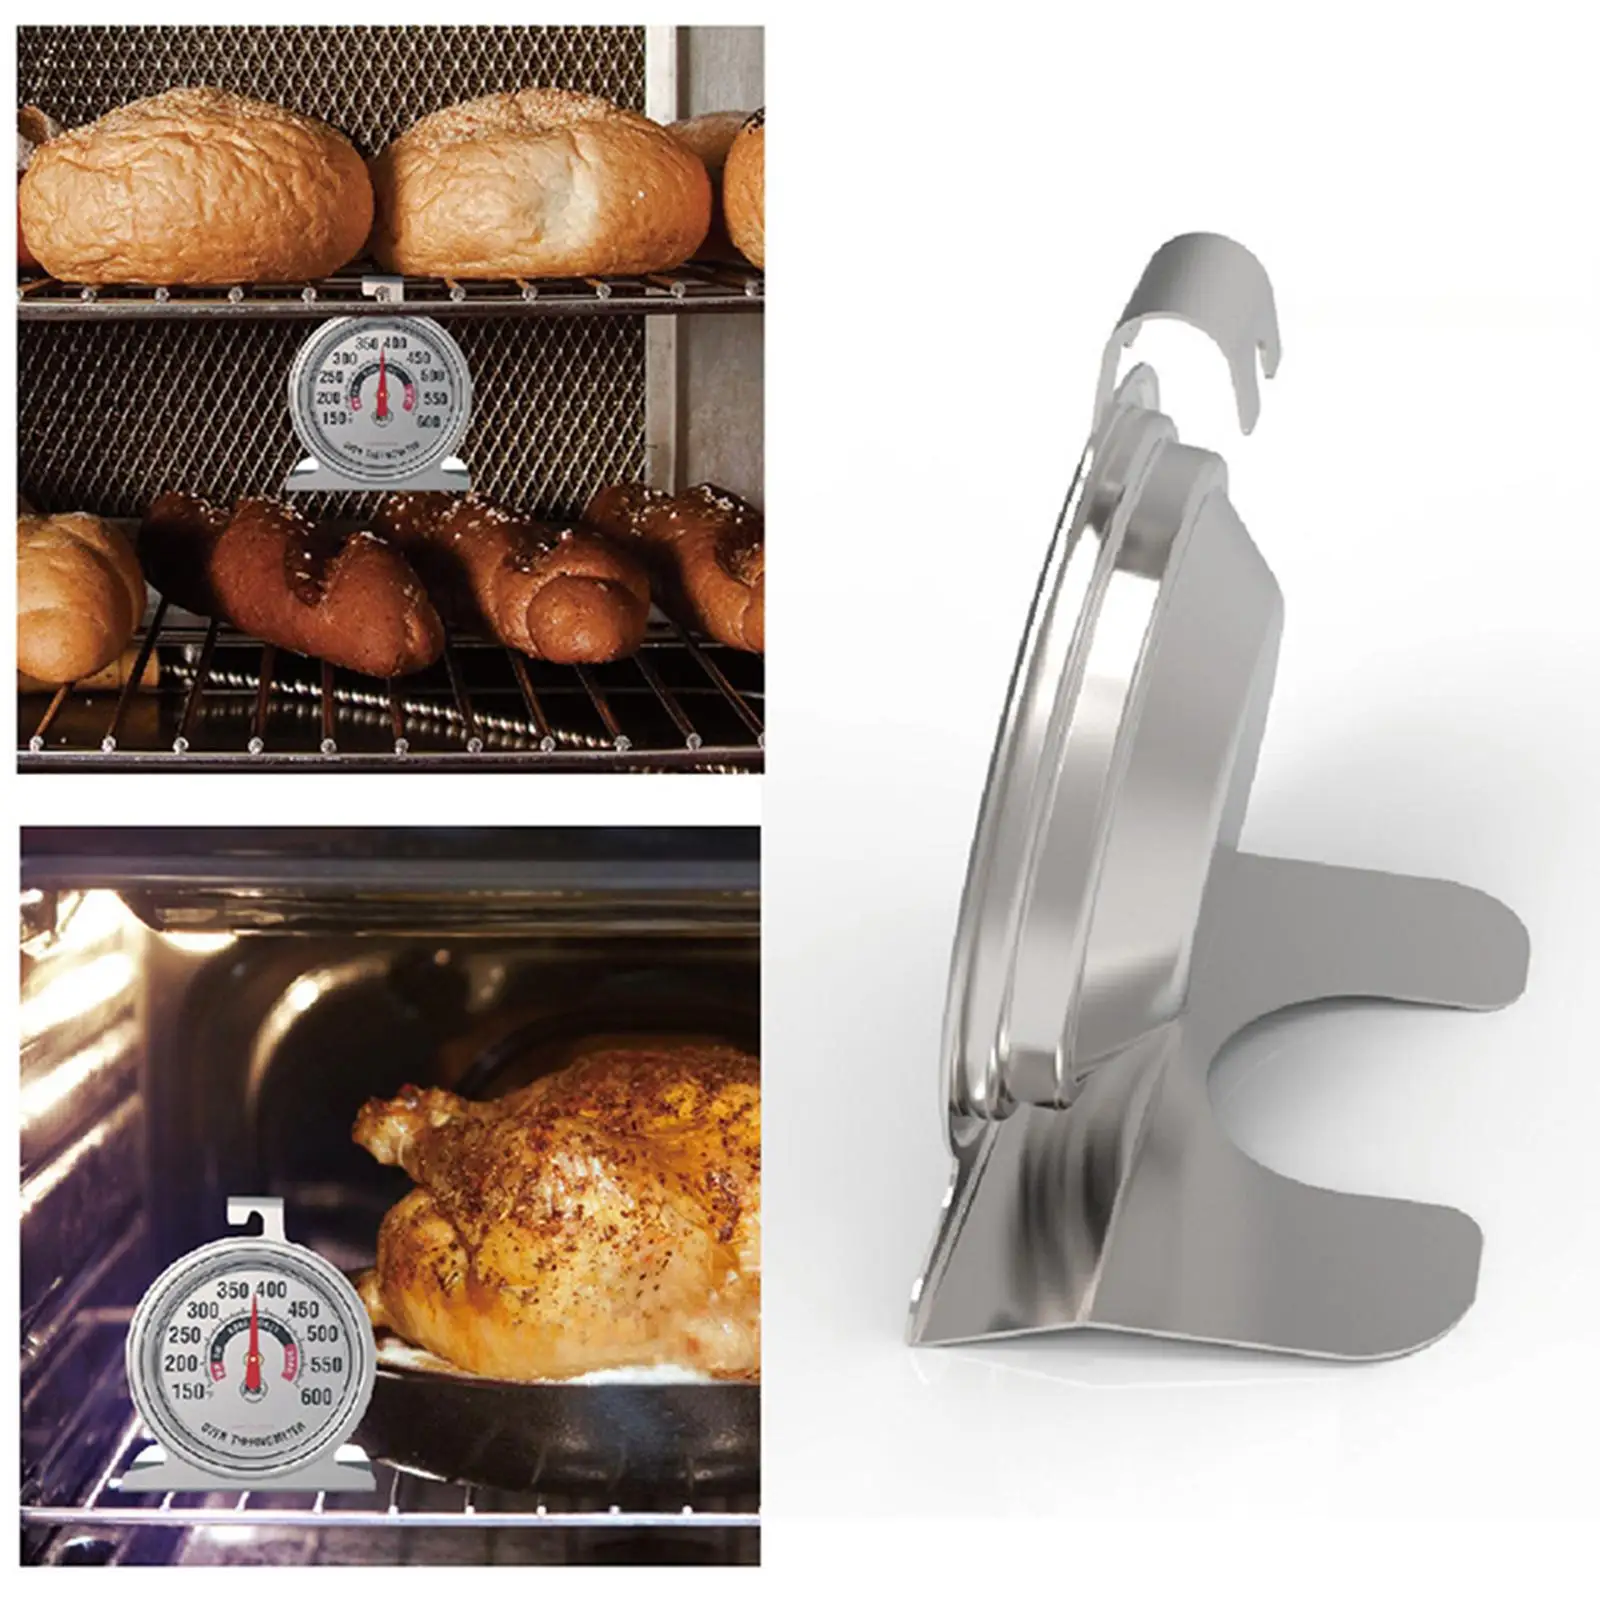 to Read with Large Hook and Panel Base for Hanging or Stand Easily, Leave time Kitchen Cooking